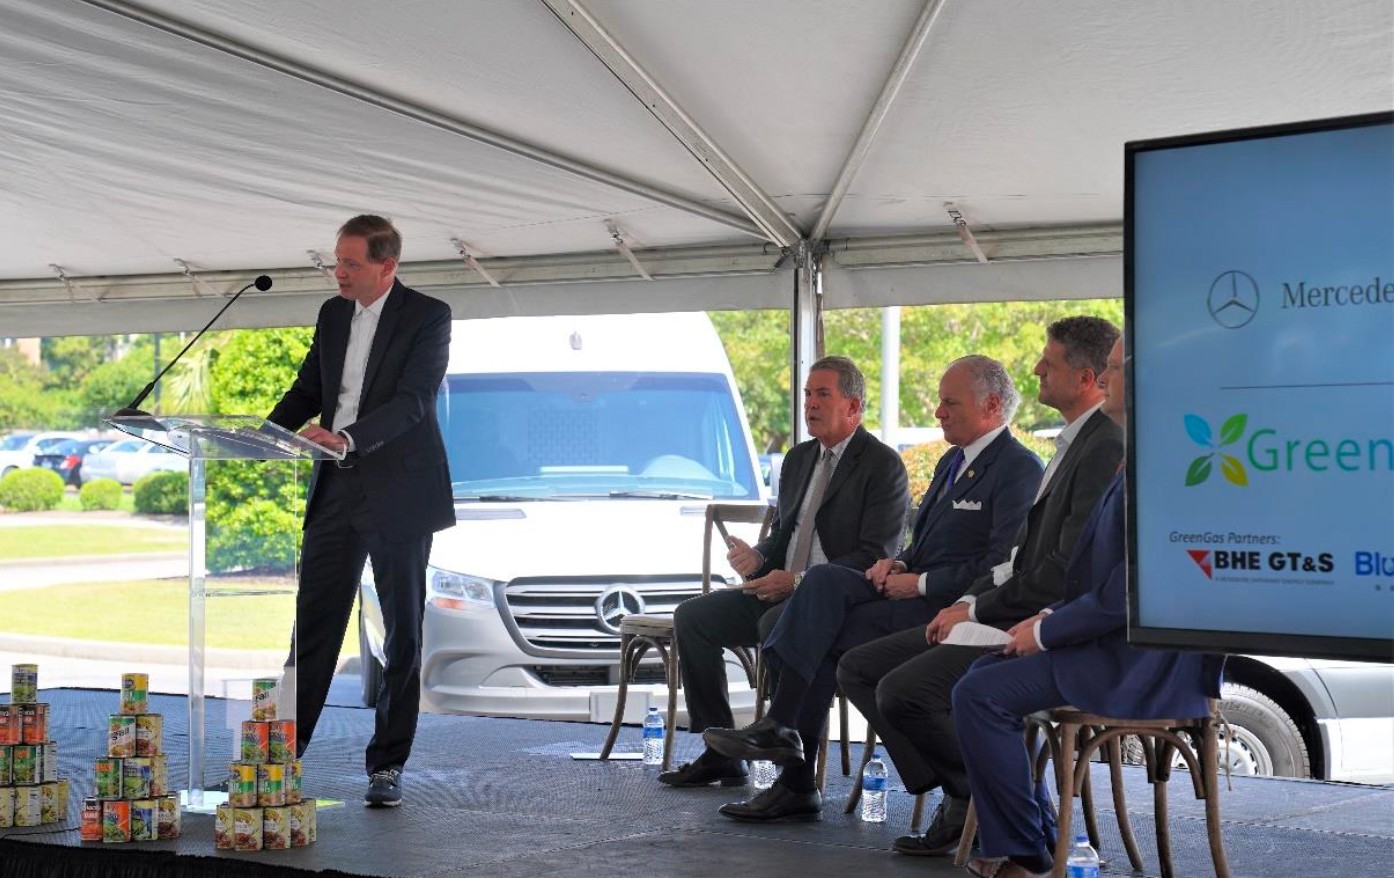 Axel Bense of Mercedes-Benz Vans (from left to right), Commissioner Hugh Weathers from the South Carolina Department of Agriculture, South Carolina Gov. Henry McMaster, Marc Fetten of GreenGasUSA and McCall Swink of McCall Farms gather for the press conference. (Photo/Provided)